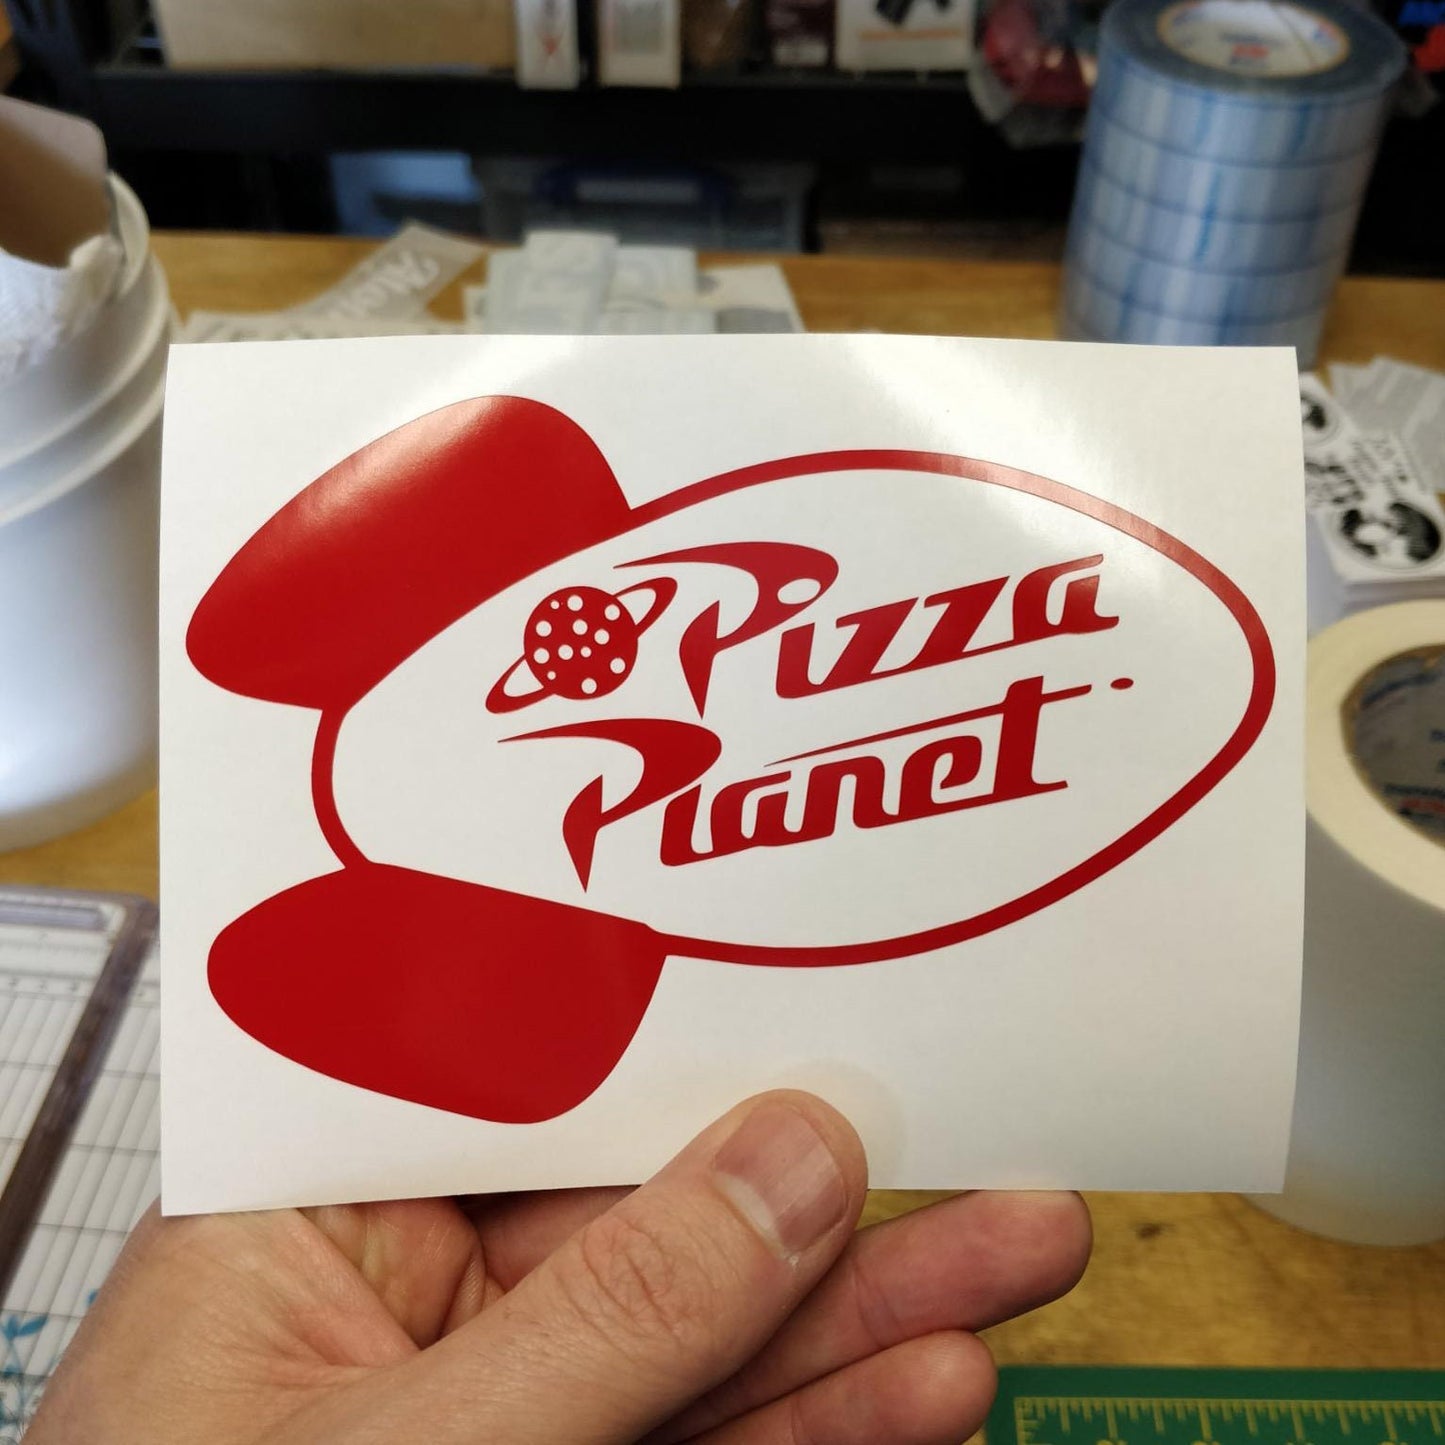 Pizza Planet Decal